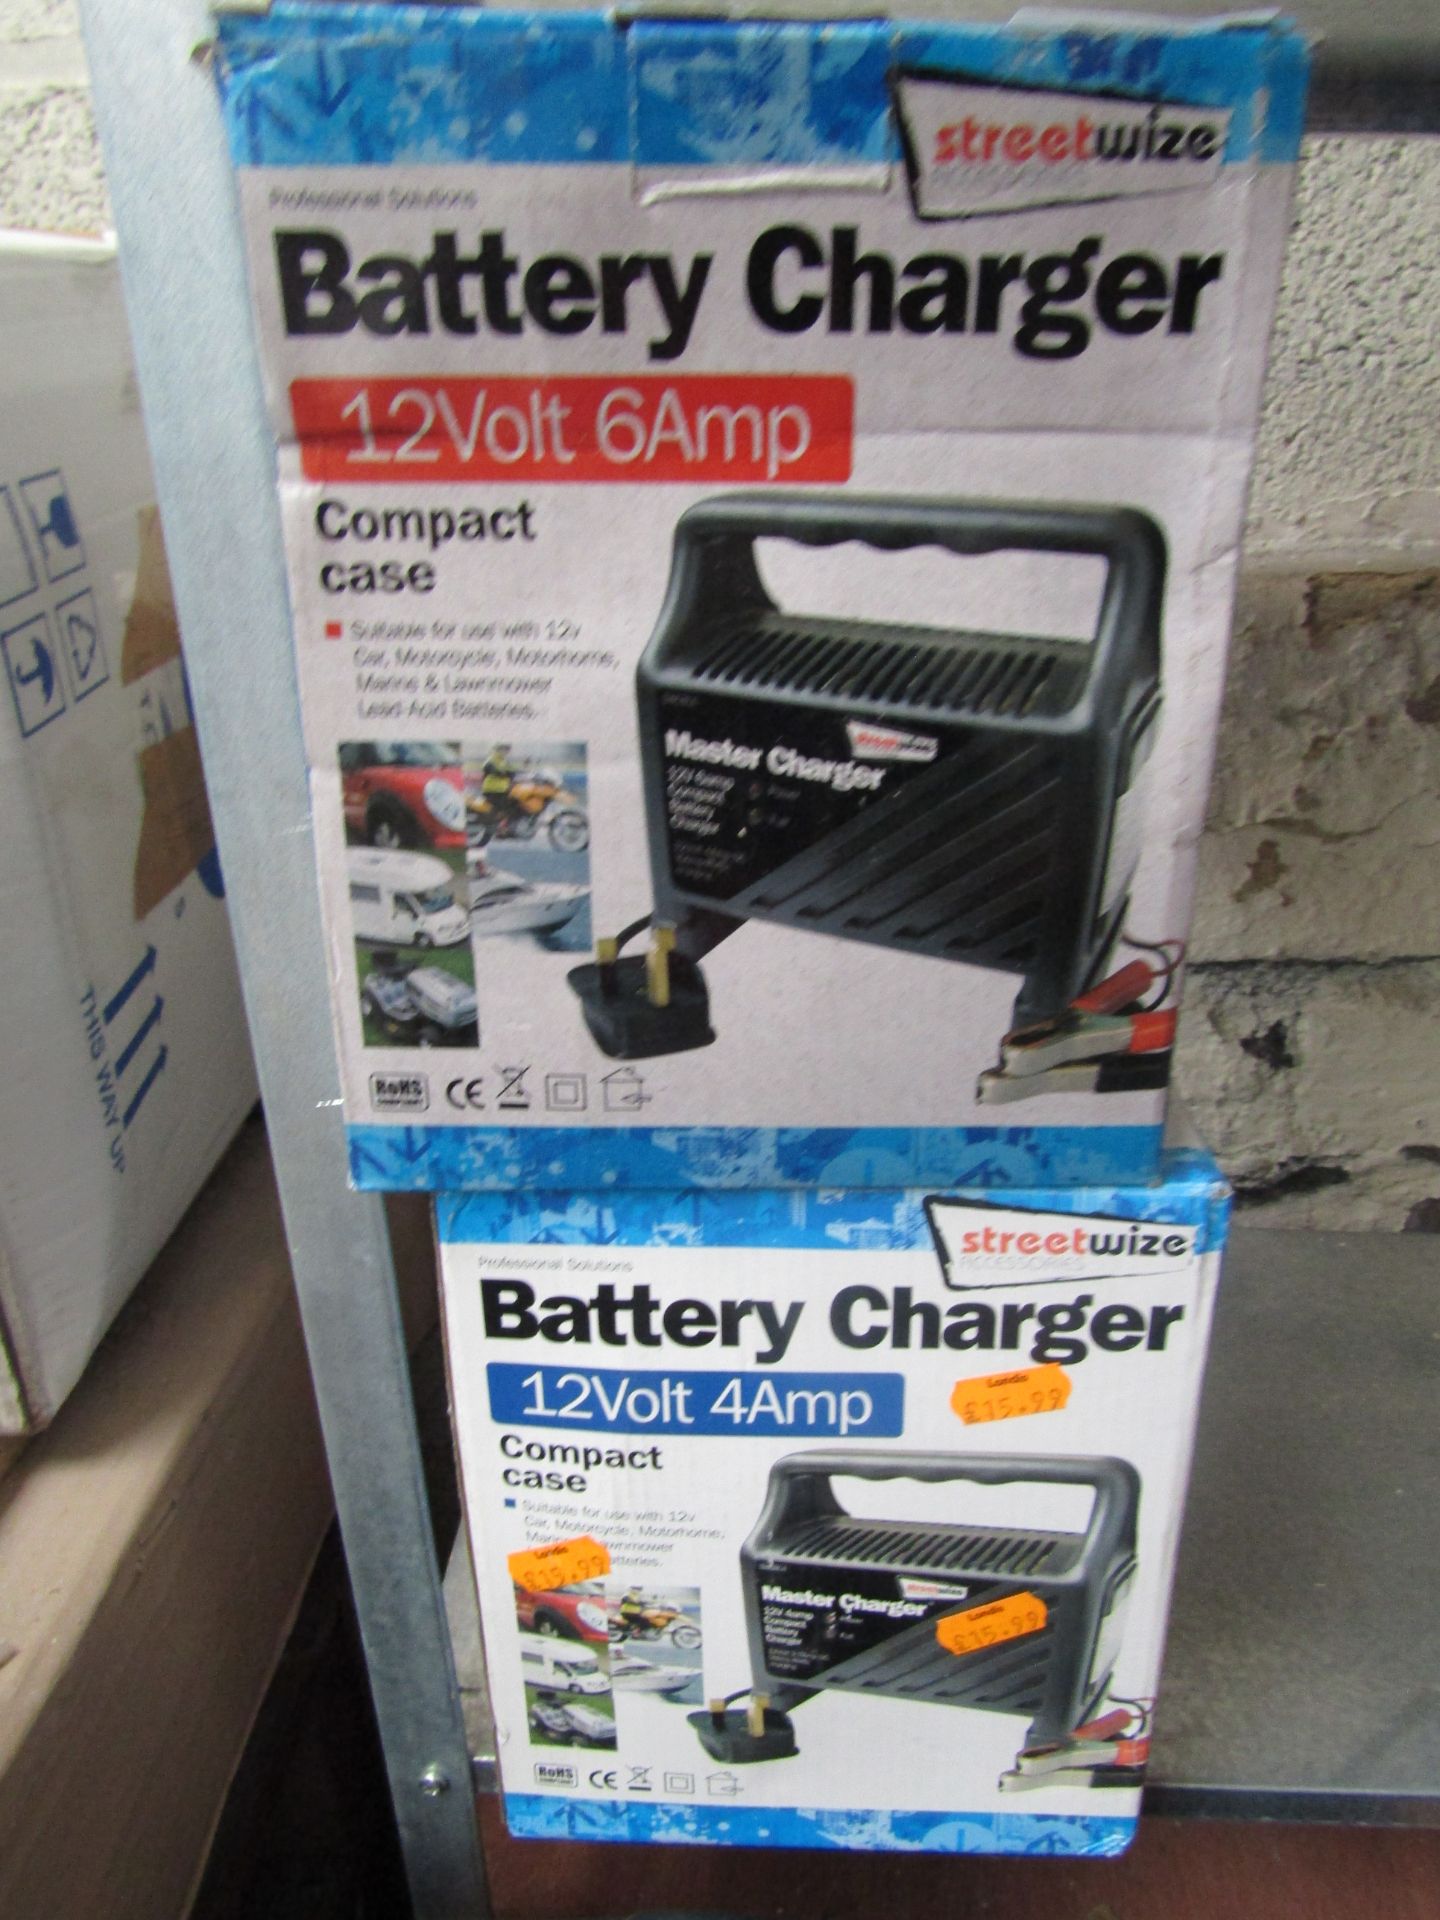 2x StreetWize 12V Battery Chargers. Boxed.